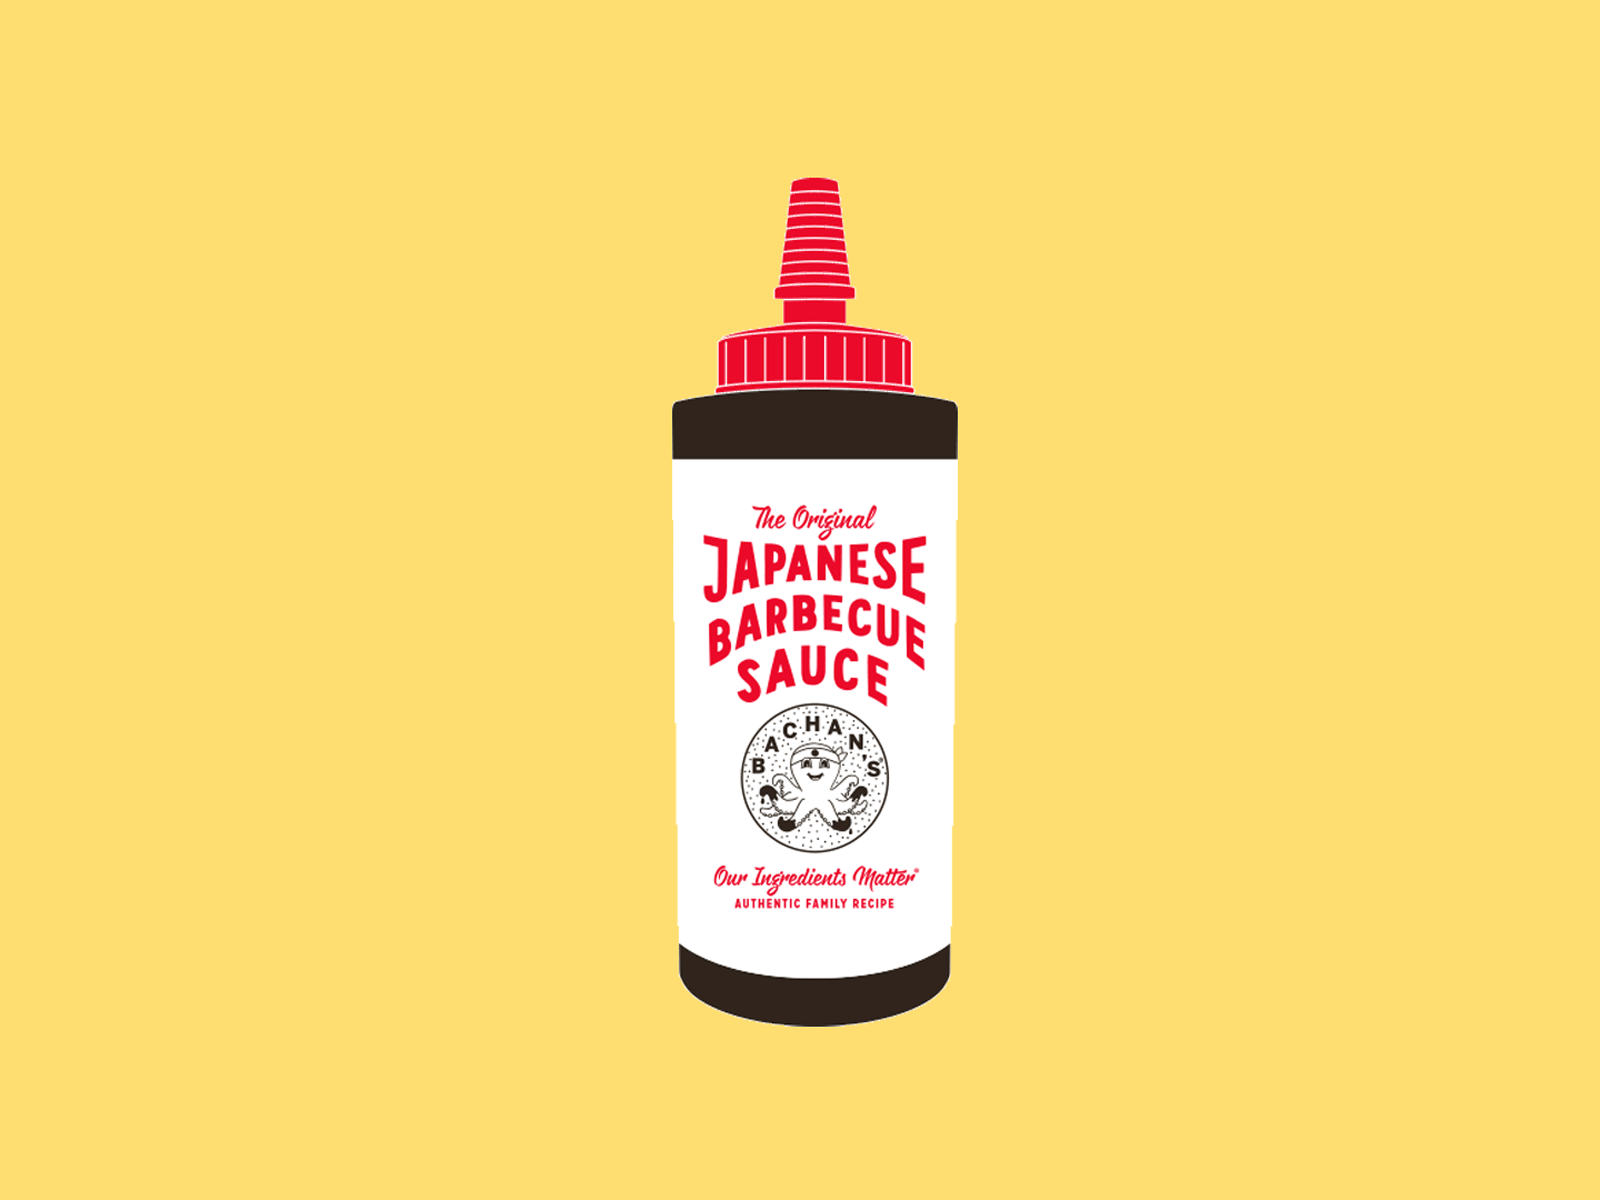 Bachan's Japanese Barbecue Sauce animated bachans bachans japanese barbecue sauce barbecue bbq bottle gif illustration japan japanese octopus packaging packagingdesign red sauce yellow